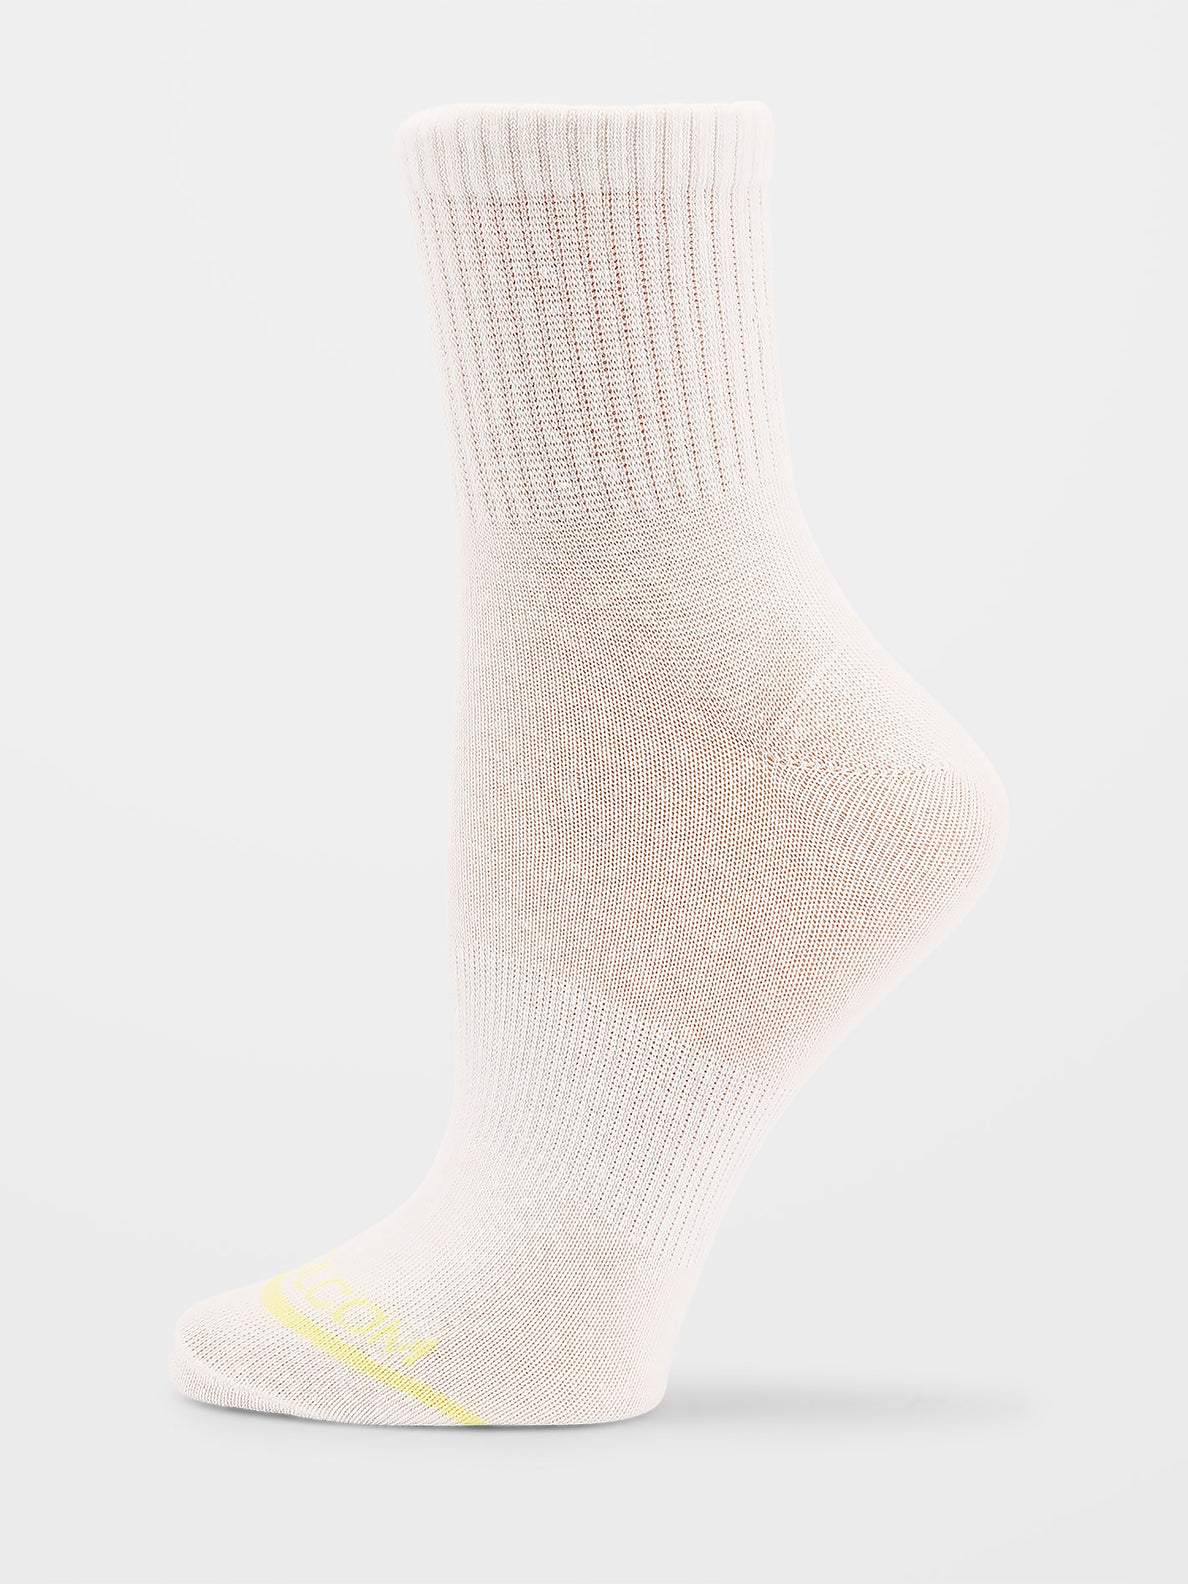 The New Crew Socks (3 pack) - ASSORTED COLORS (E6332200_AST) [5]